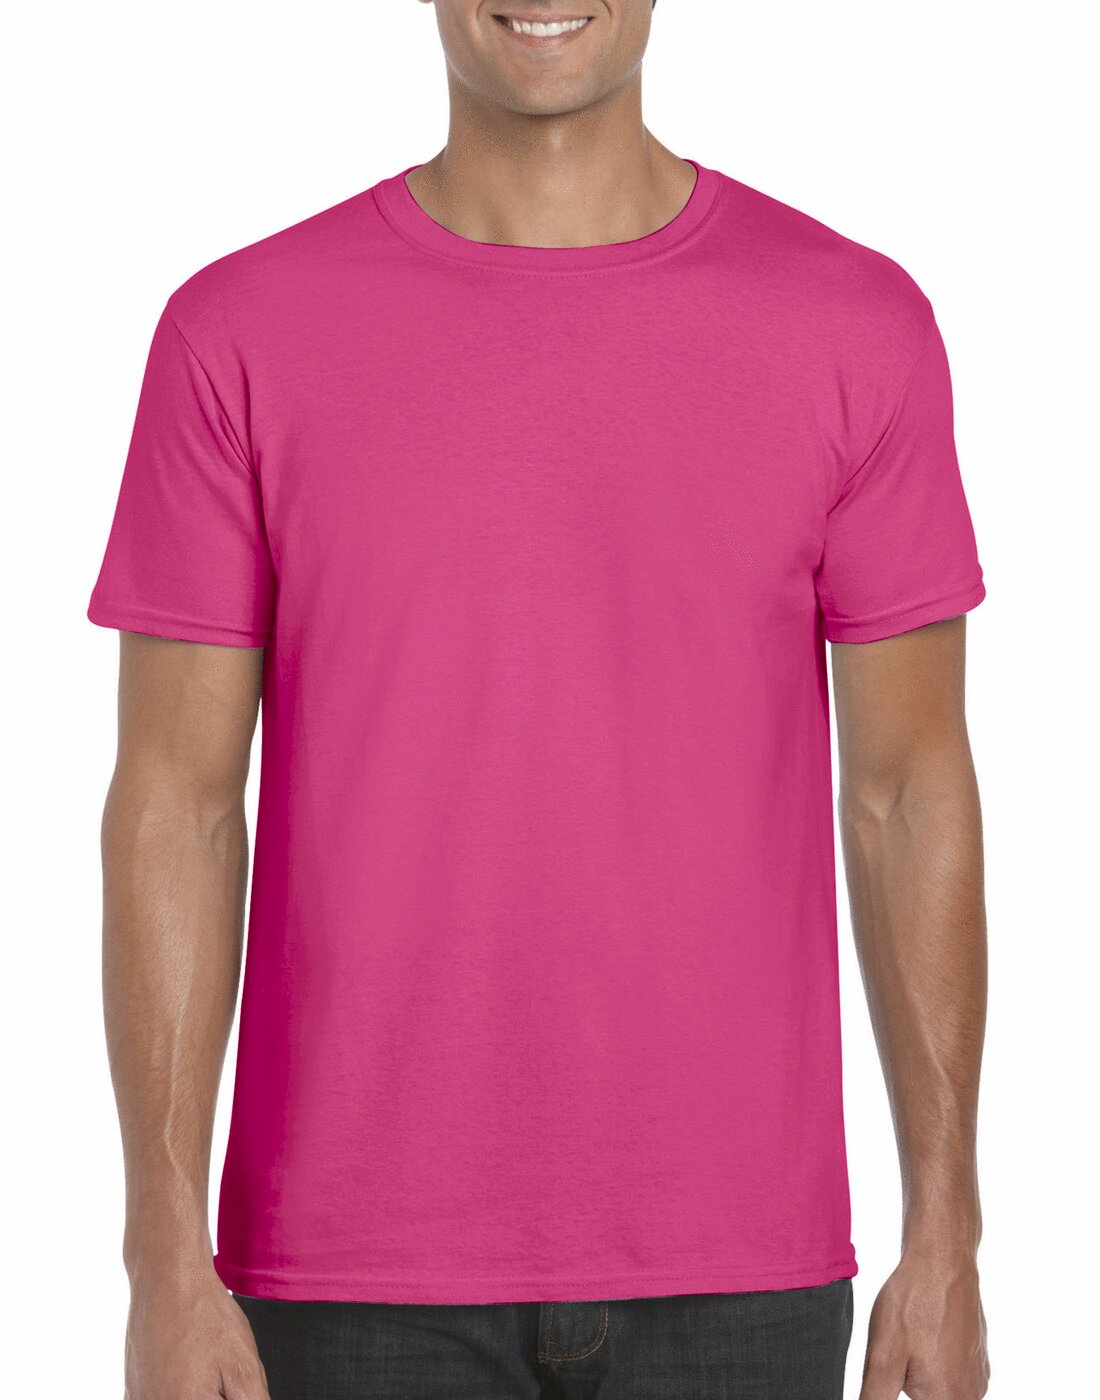 Gildan Adult Softstyle Ringspun T-Shirt - GD01 - Heliconia